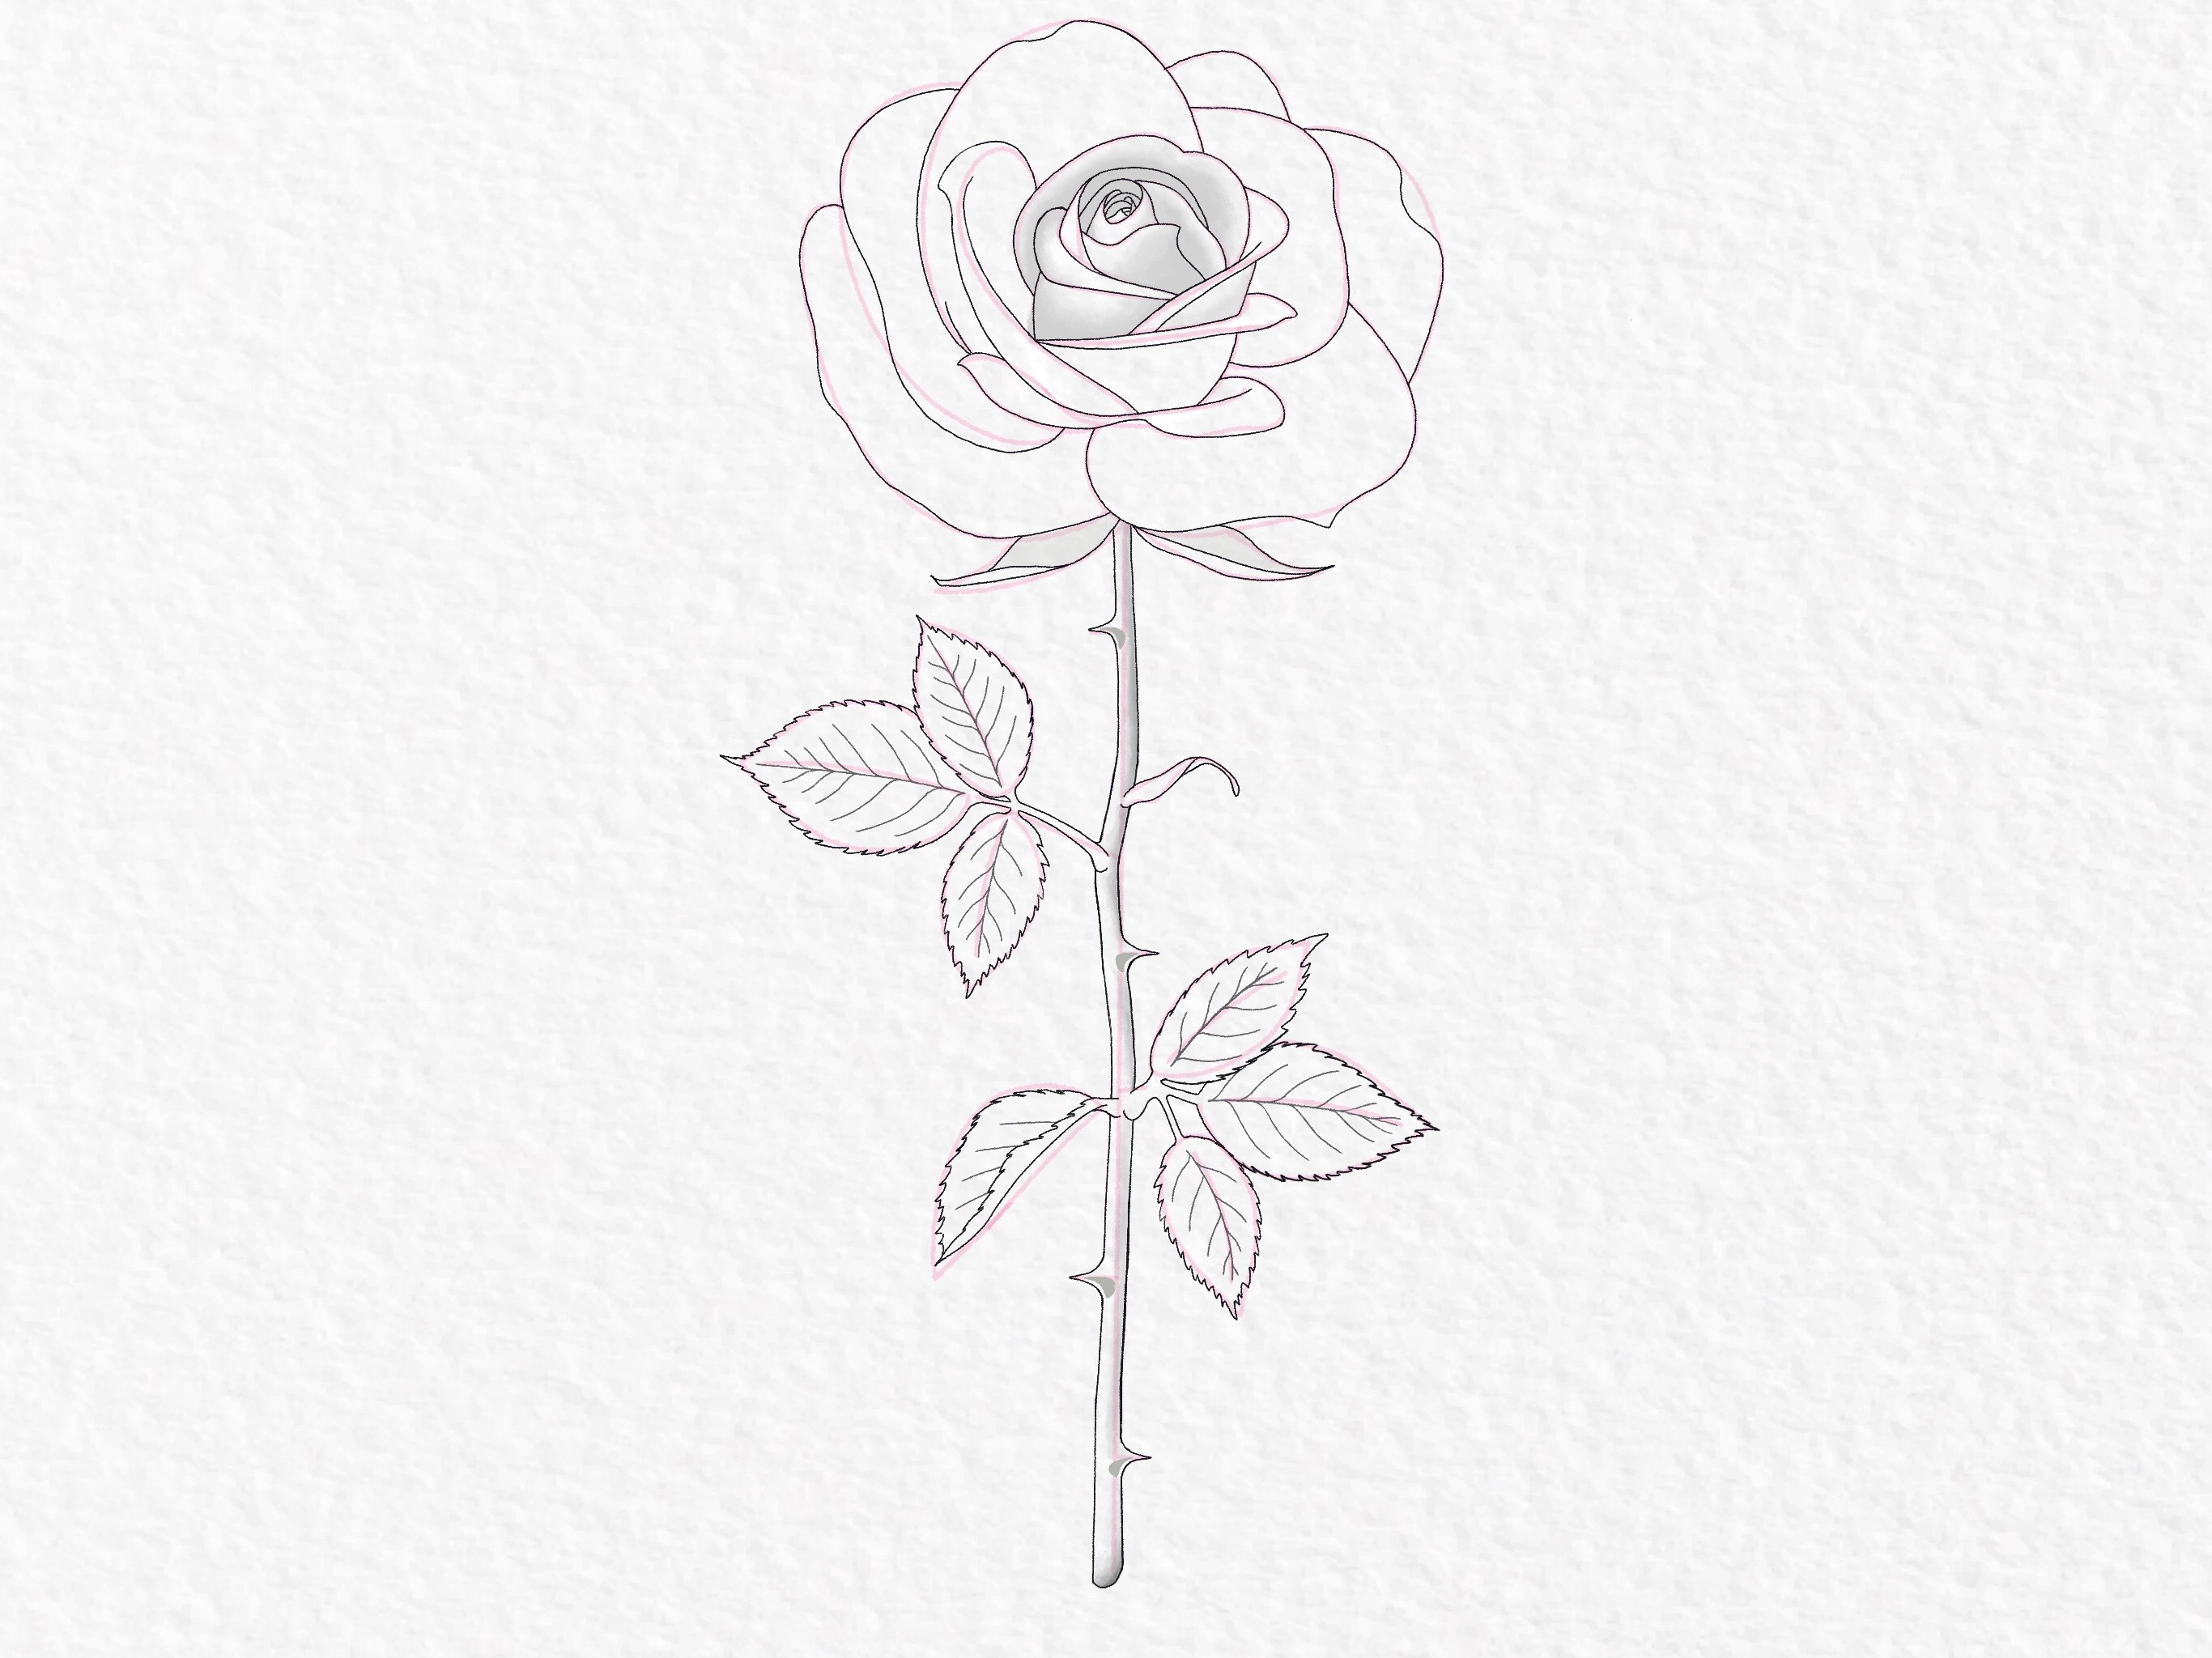 How to draw a rose, step by step drawing tutorial - step 42